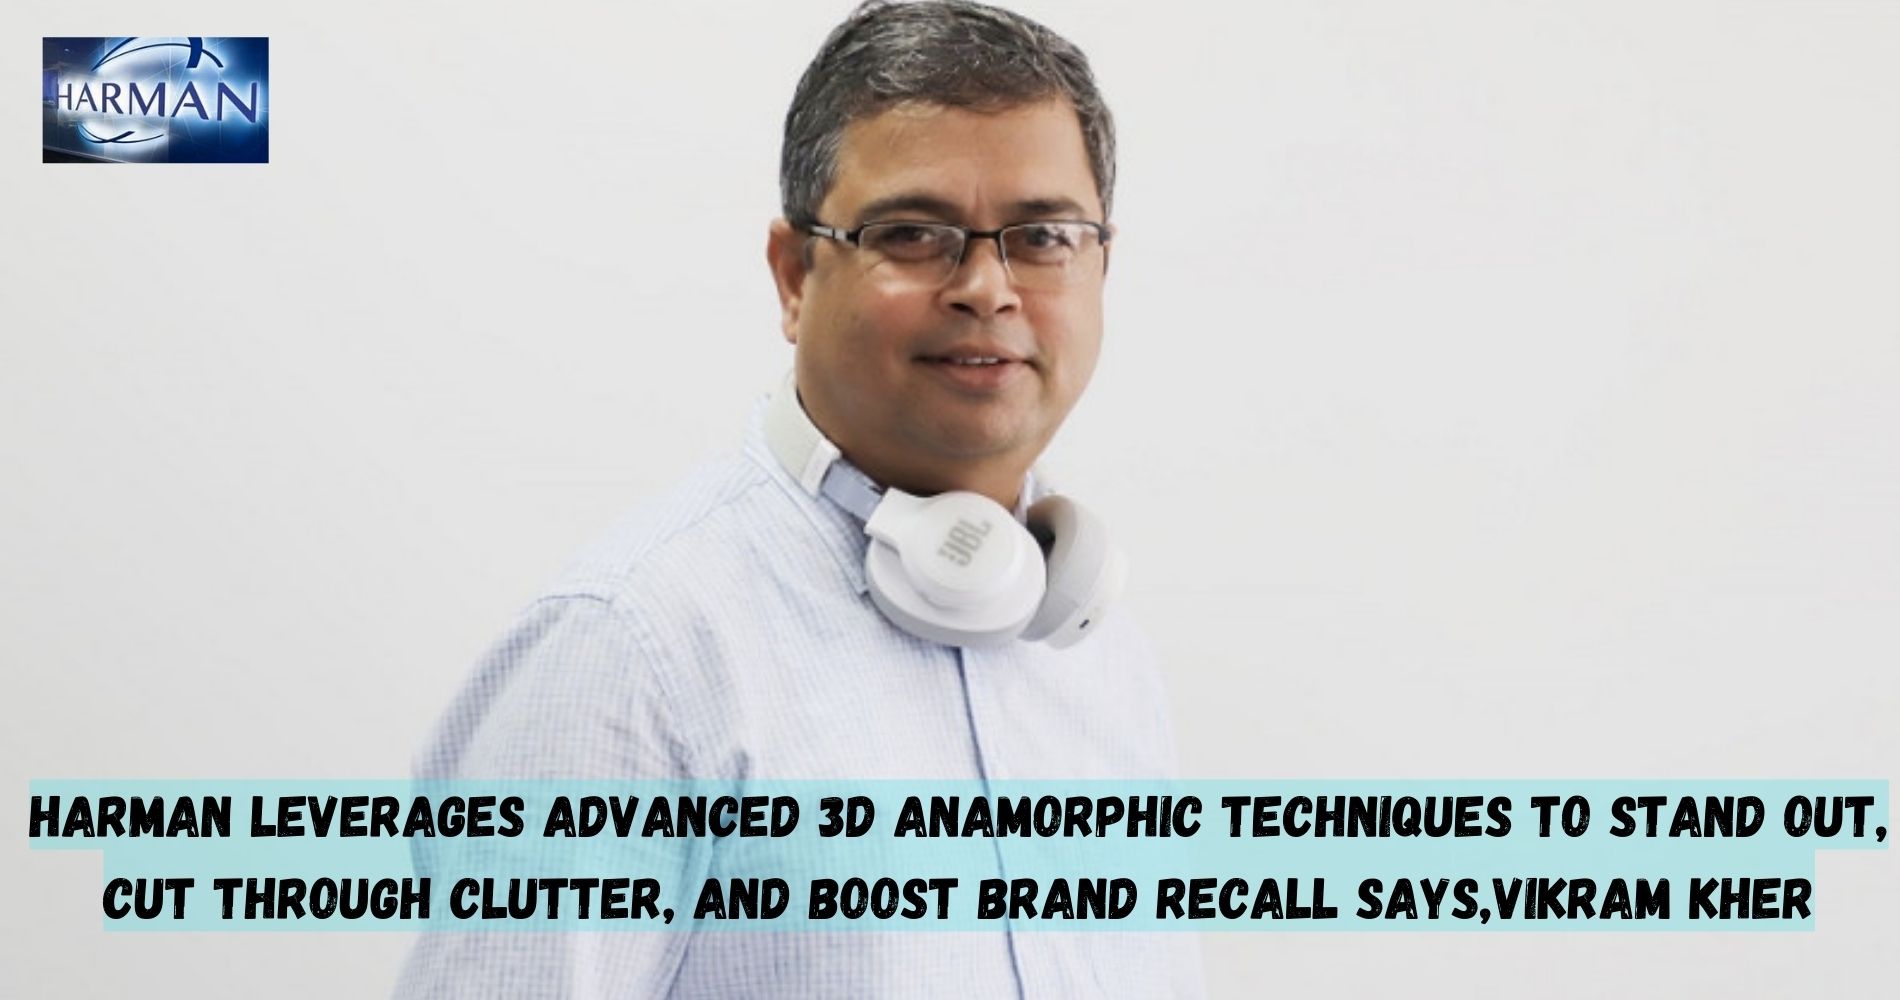 HARMAN Leverages Advanced 3D Anamorphic Techniques To Stand Out, Cut Through Clutter, And Boost Brand Recall says,Vikram Kher